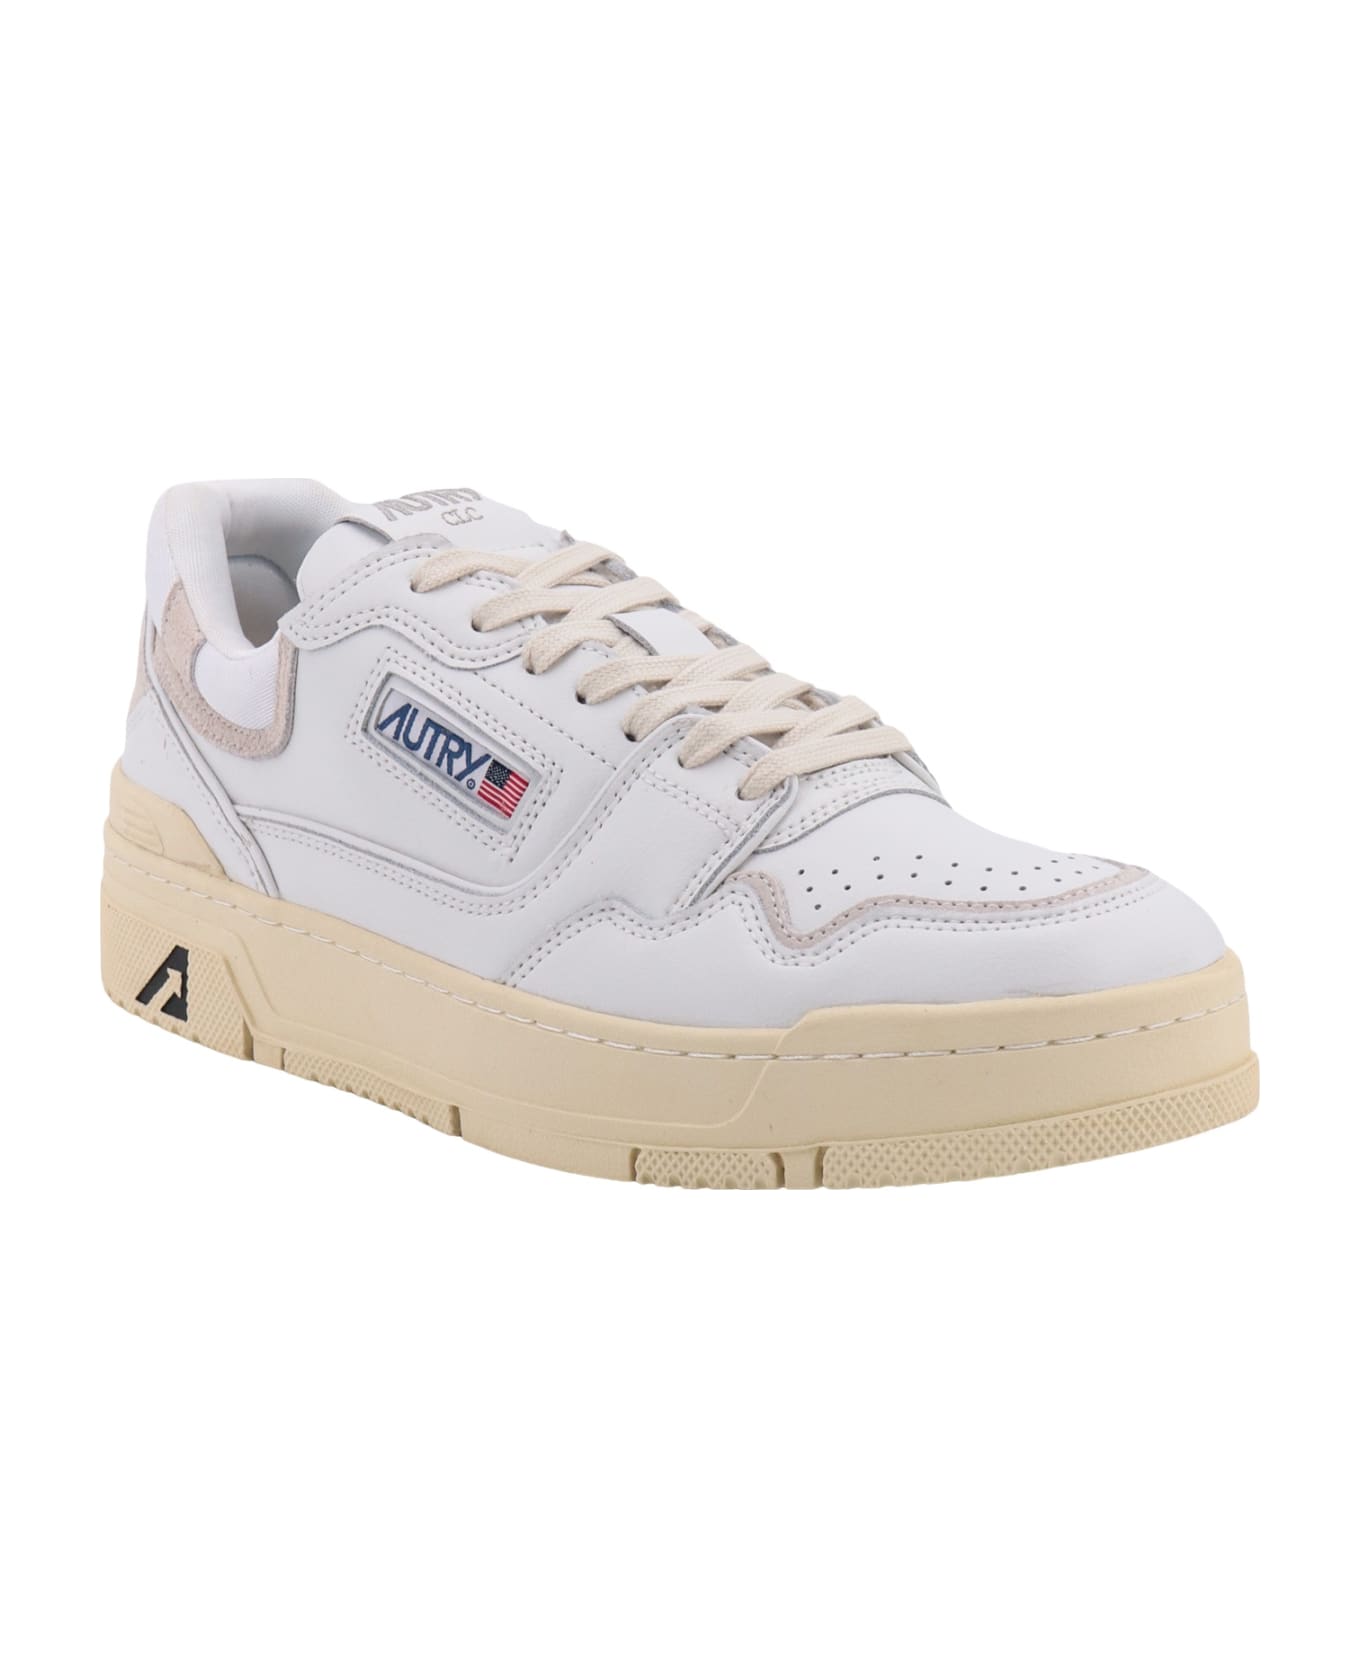 Autry Rookie Low Sneakers - White